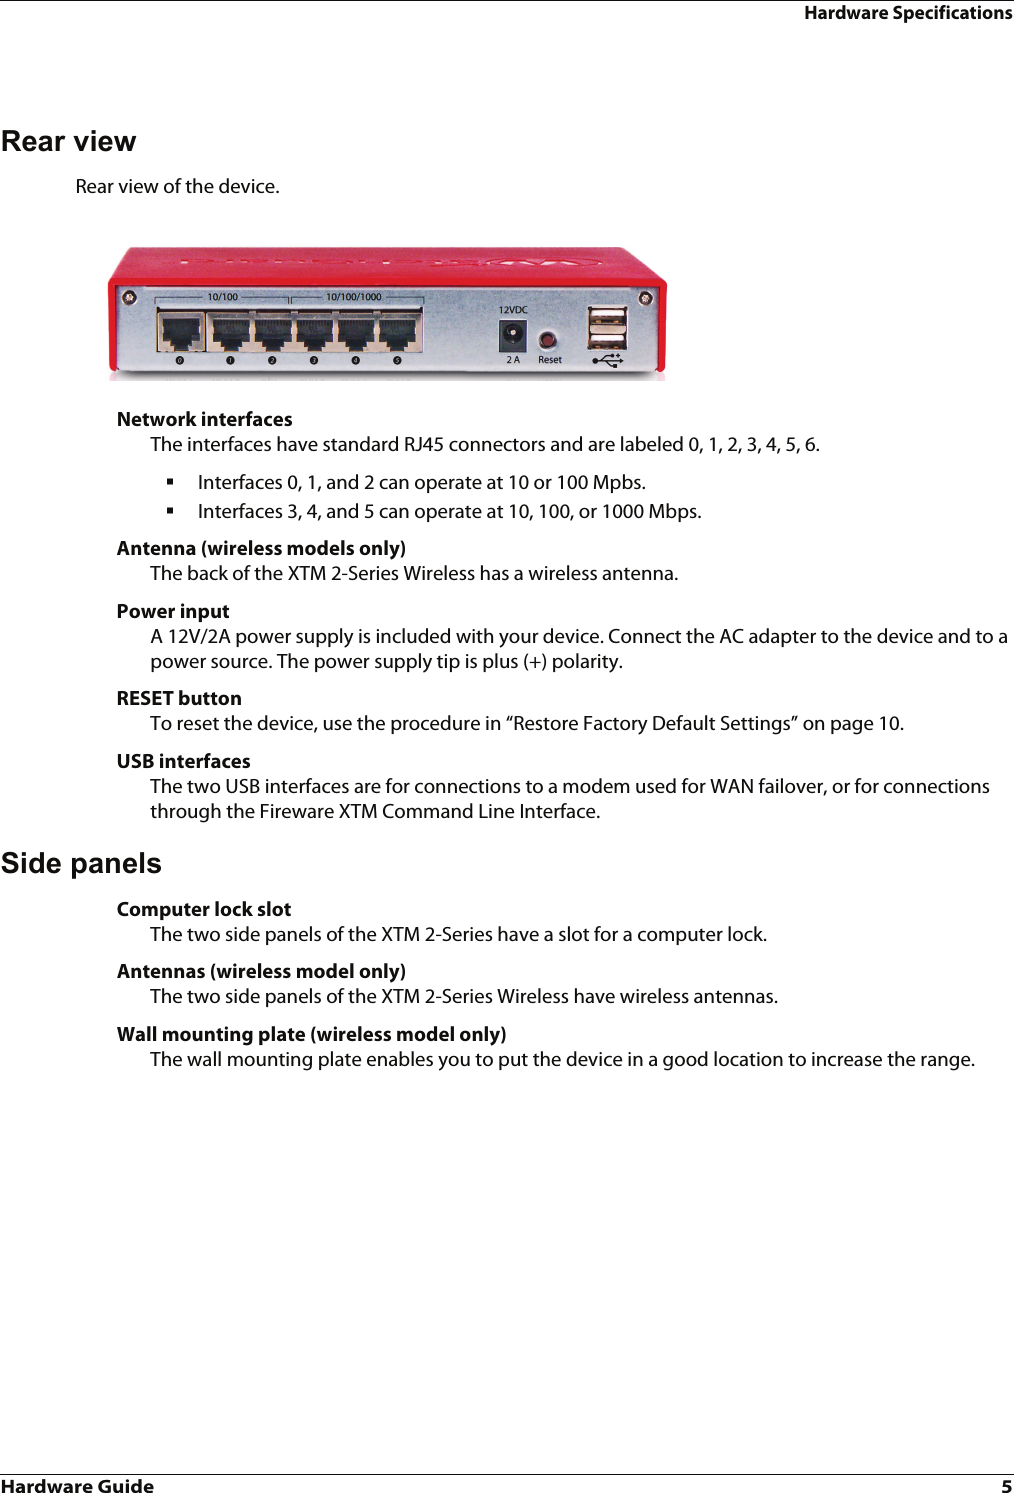 Hardware Guide 5Hardware SpecificationsRear viewRear view of the device.Network interfacesThe interfaces have standard RJ45 connectors and are labeled 0, 1, 2, 3, 4, 5, 6. Interfaces 0, 1, and 2 can operate at 10 or 100 Mpbs.Interfaces 3, 4, and 5 can operate at 10, 100, or 1000 Mbps.Antenna (wireless models only)The back of the XTM 2-Series Wireless has a wireless antenna.Power inputA 12V/2A power supply is included with your device. Connect the AC adapter to the device and to a power source. The power supply tip is plus (+) polarity.RESET buttonTo reset the device, use the procedure in “Restore Factory Default Settings” on page 10.USB interfacesThe two USB interfaces are for connections to a modem used for WAN failover, or for connections through the Fireware XTM Command Line Interface.Side panelsComputer lock slotThe two side panels of the XTM 2-Series have a slot for a computer lock.Antennas (wireless model only)The two side panels of the XTM 2-Series Wireless have wireless antennas. Wall mounting plate (wireless model only)The wall mounting plate enables you to put the device in a good location to increase the range. 